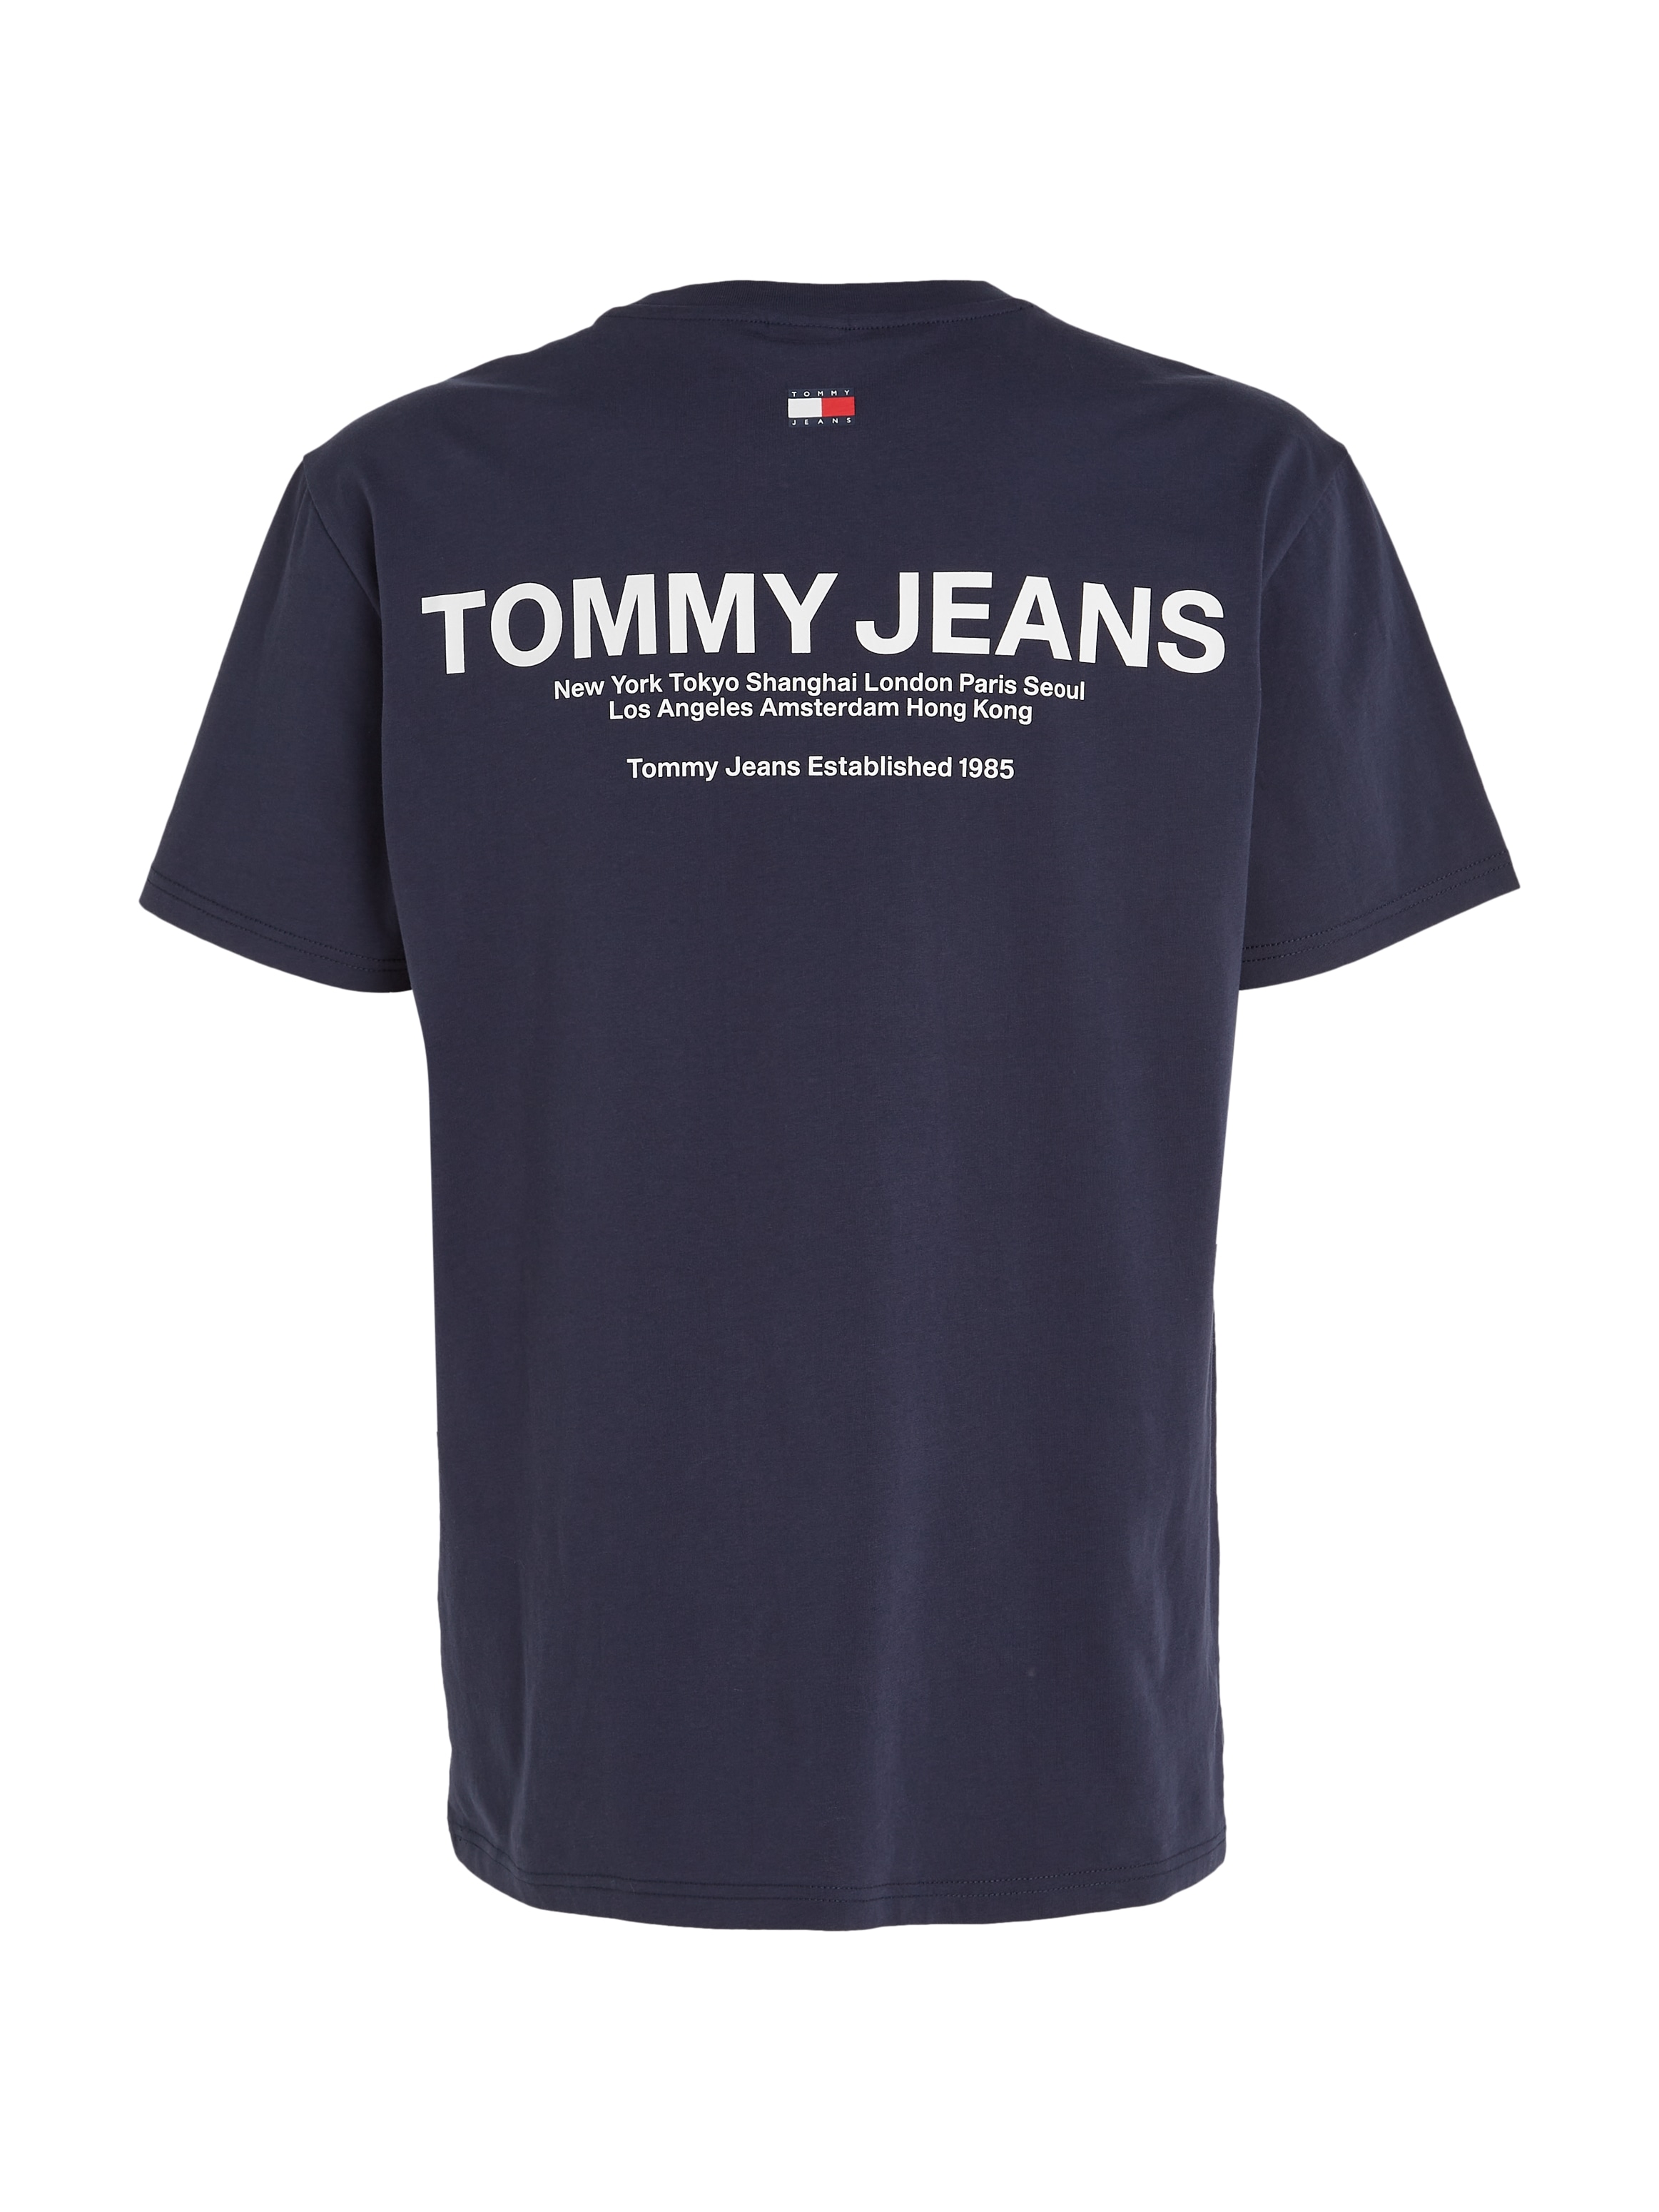 PRINT kaufen LINEAR BACK »TJM T-Shirt CLSC Tommy bei OTTO Jeans online TEE«